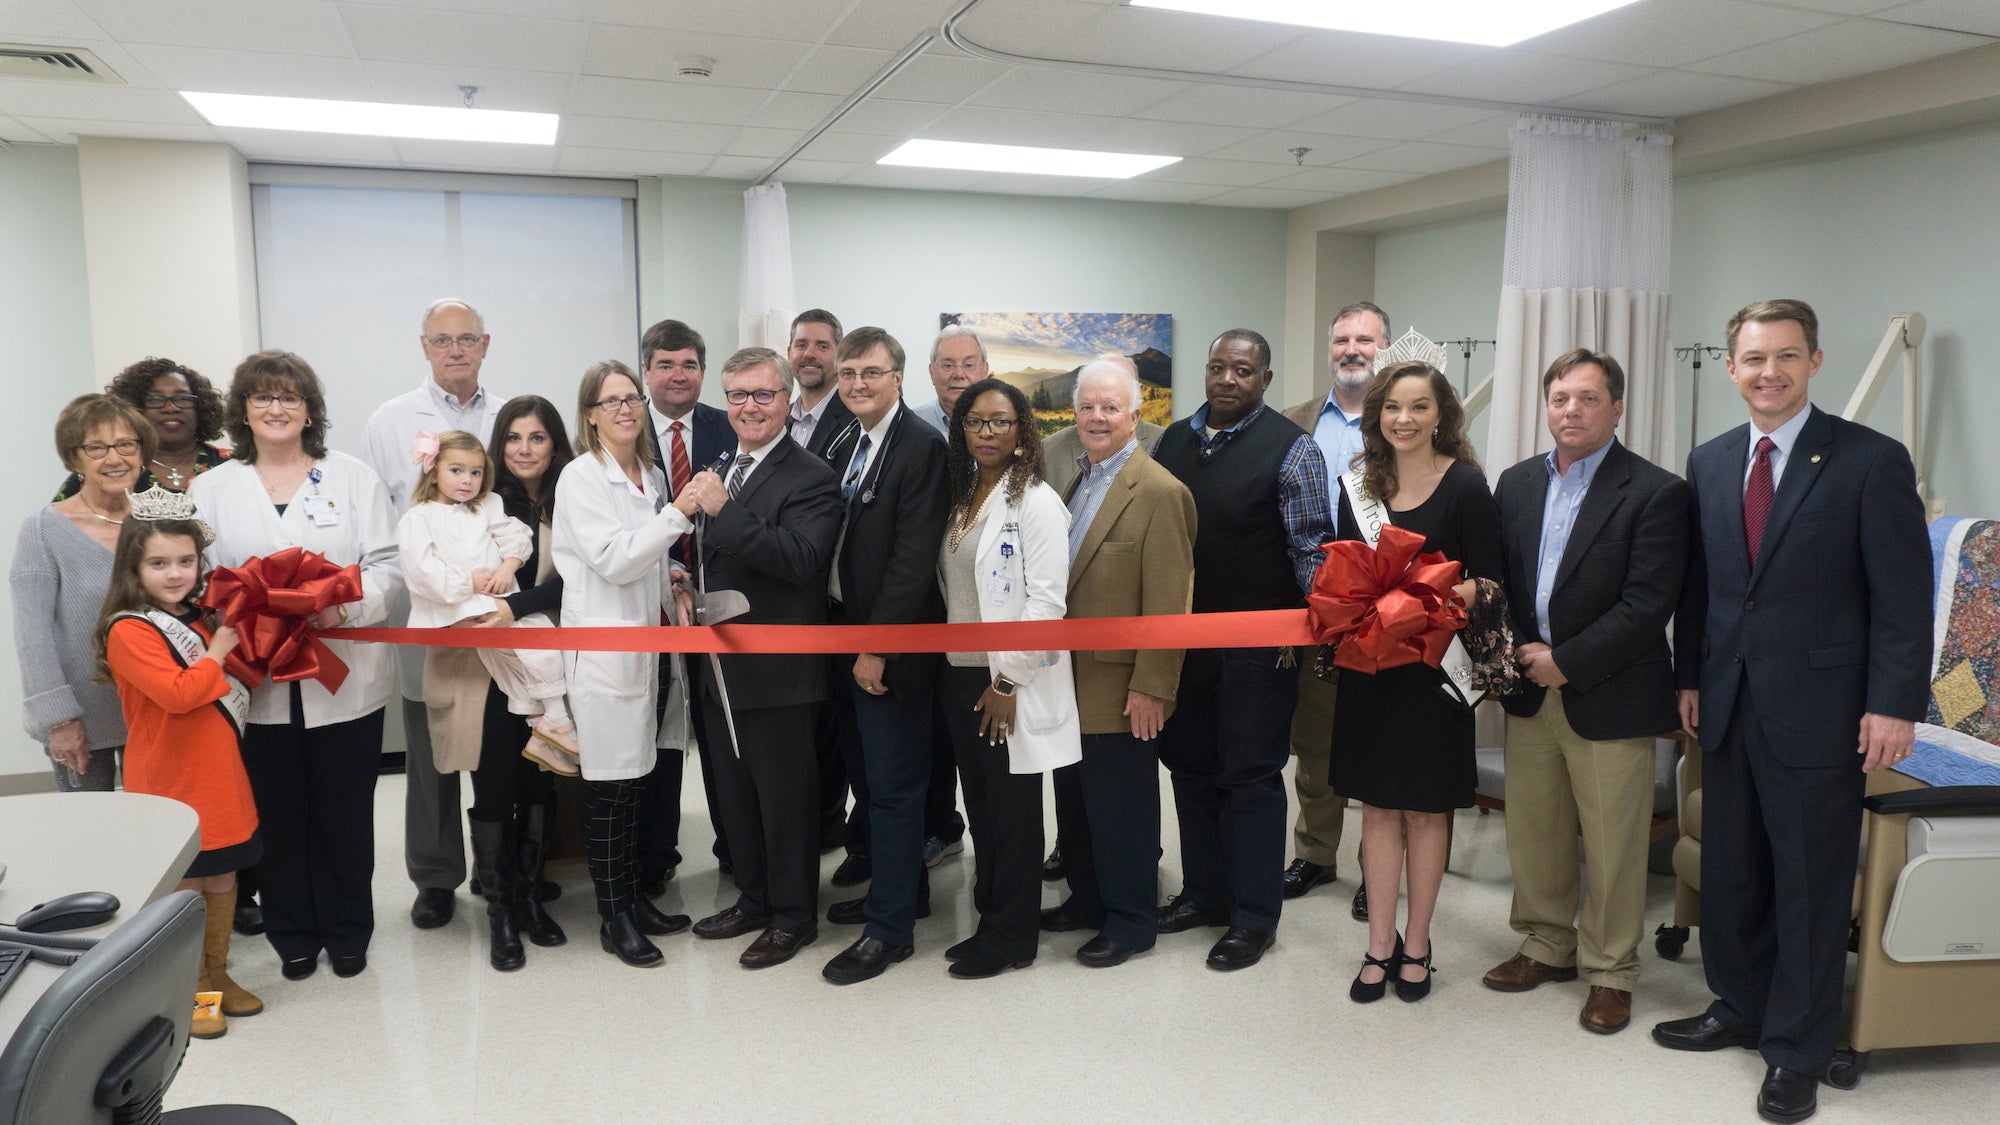 'SACRED GROUND': TRMC cuts ribbon on new Cancer Center - The Troy ...